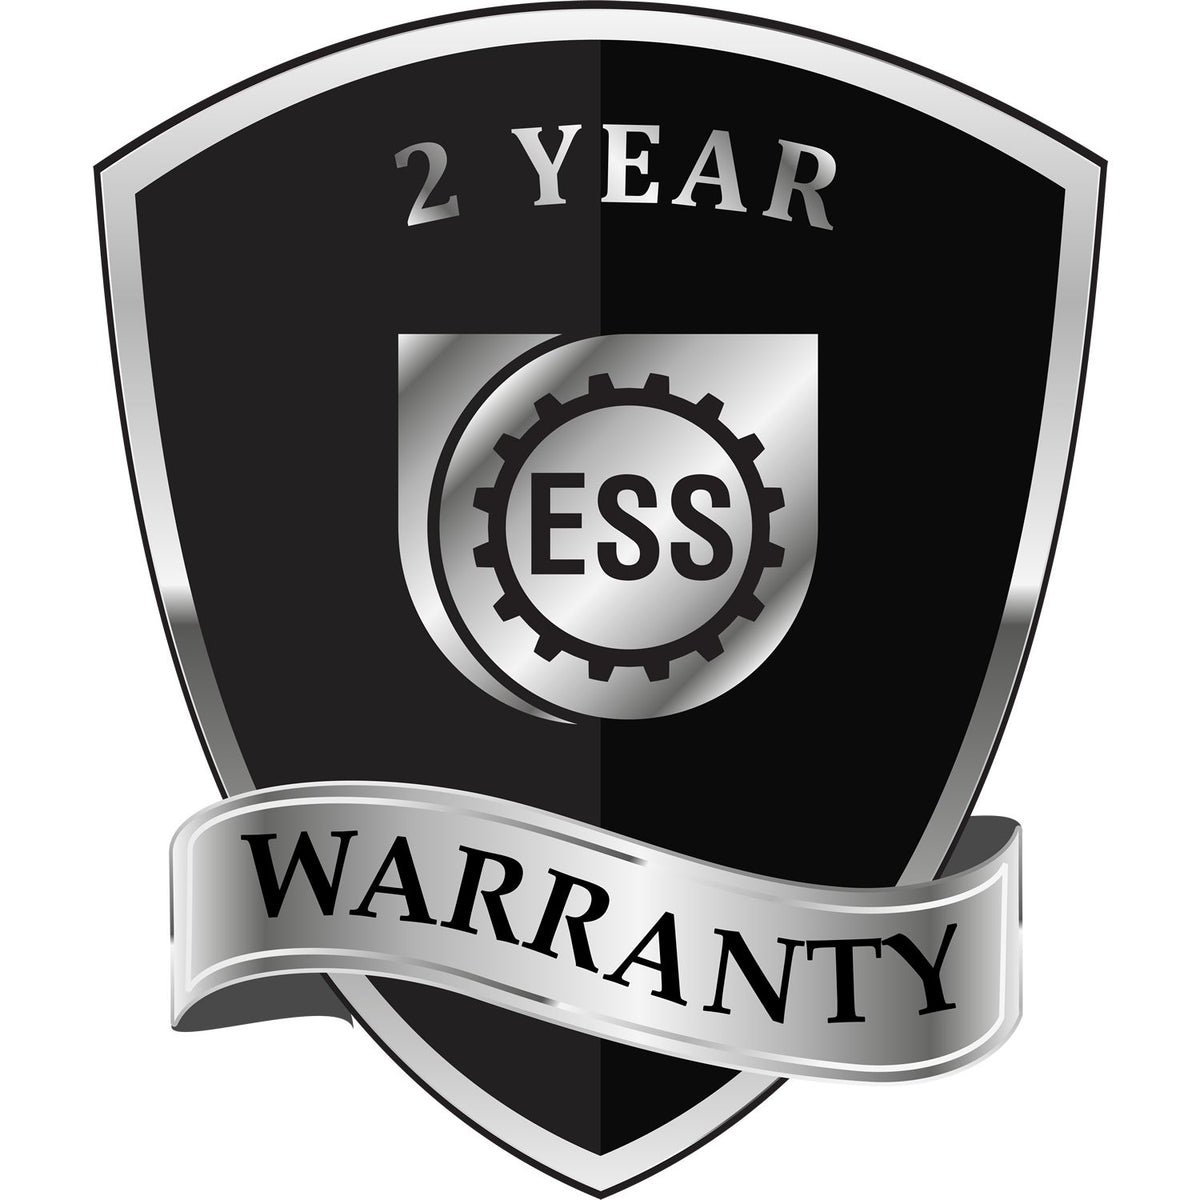 A badge or emblem showing a warranty icon for the State of New Hampshire Extended Long Reach Engineer Seal